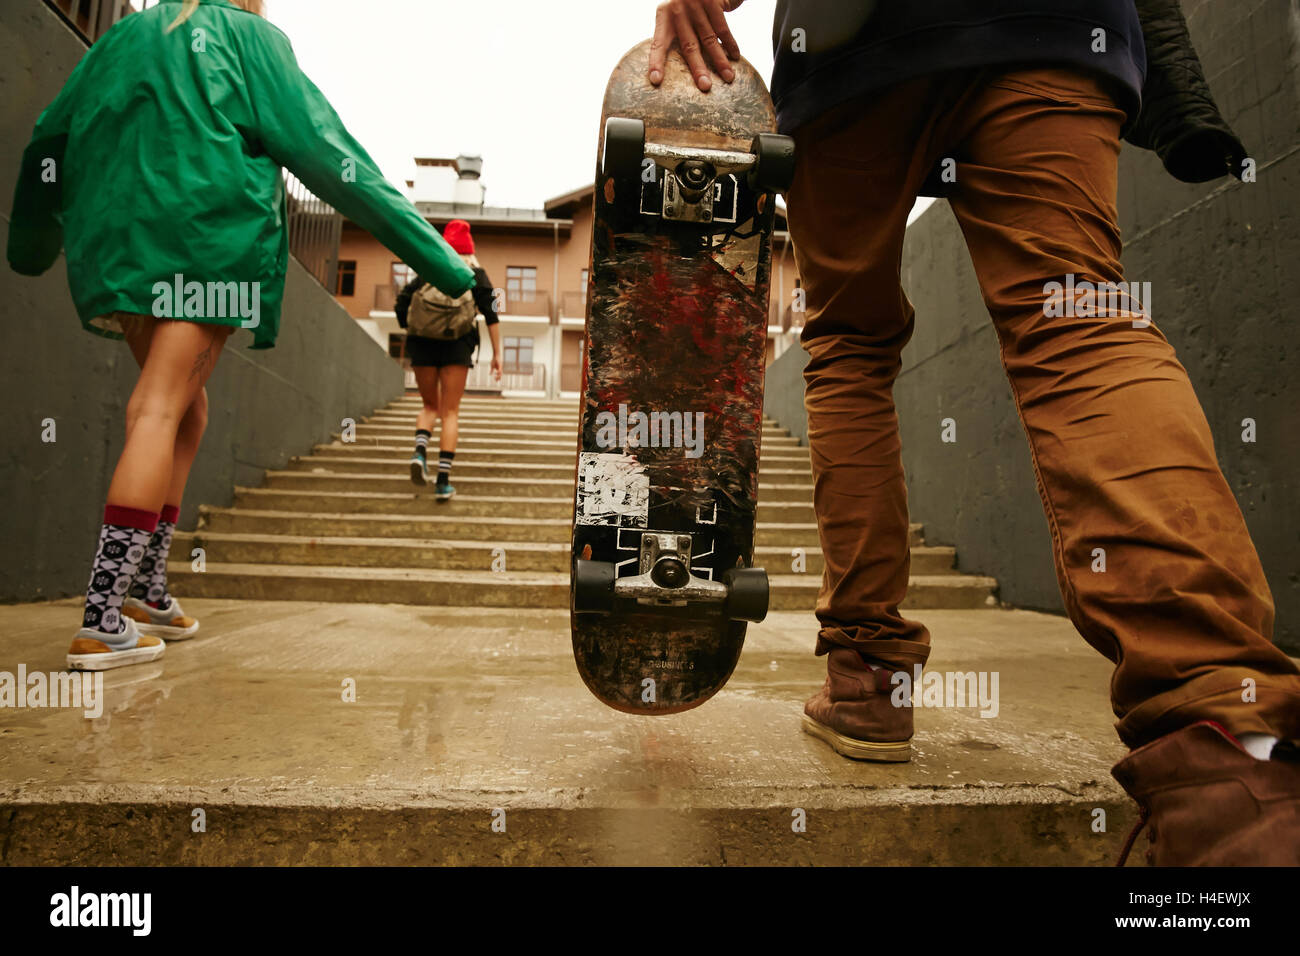 Guys are going up the stairs with a skateboard in rainy weather in Sochi Riders Lodge Stock Photo